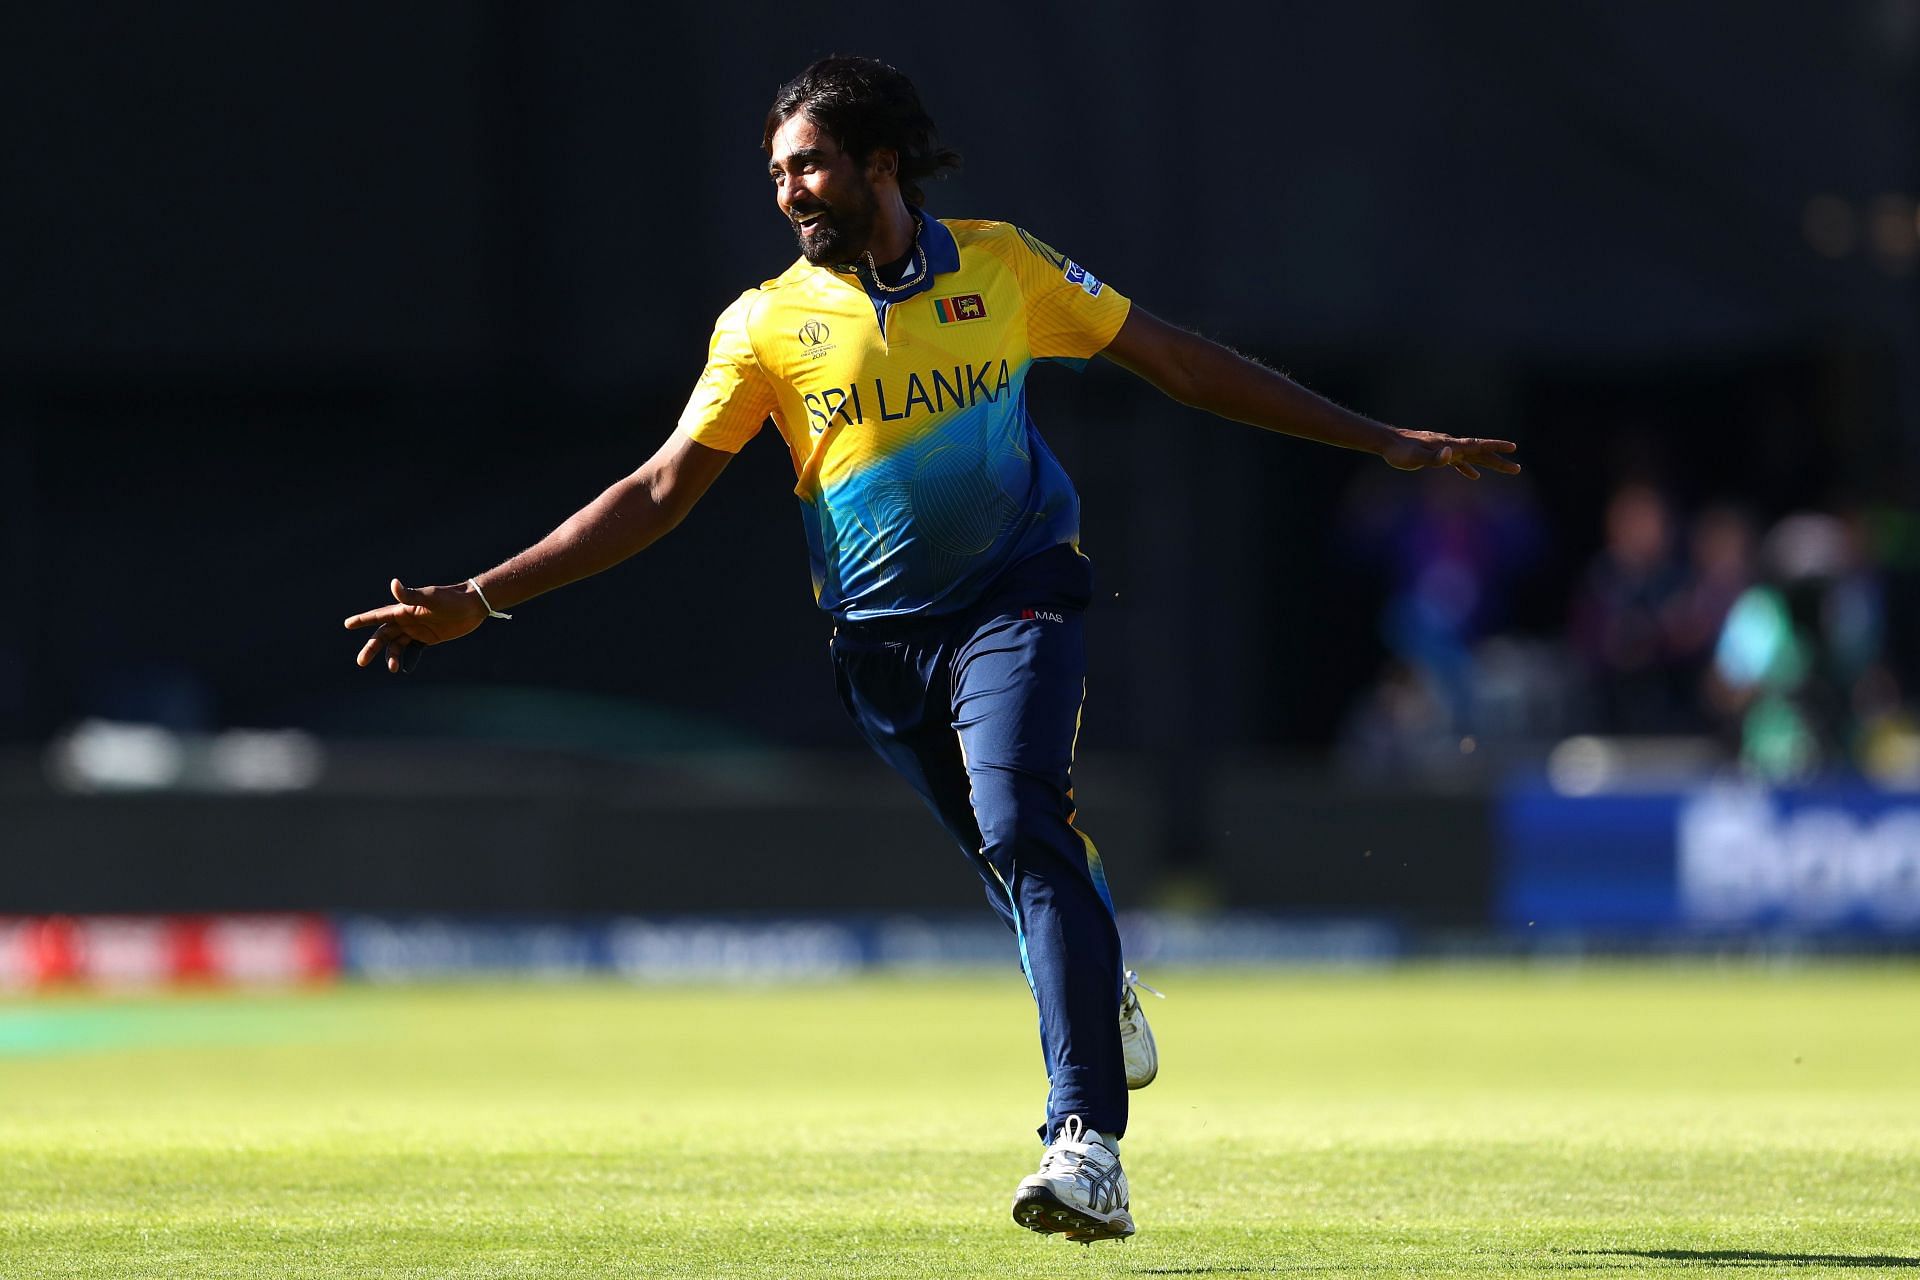 The Lankans will hope to win the series on Friday.